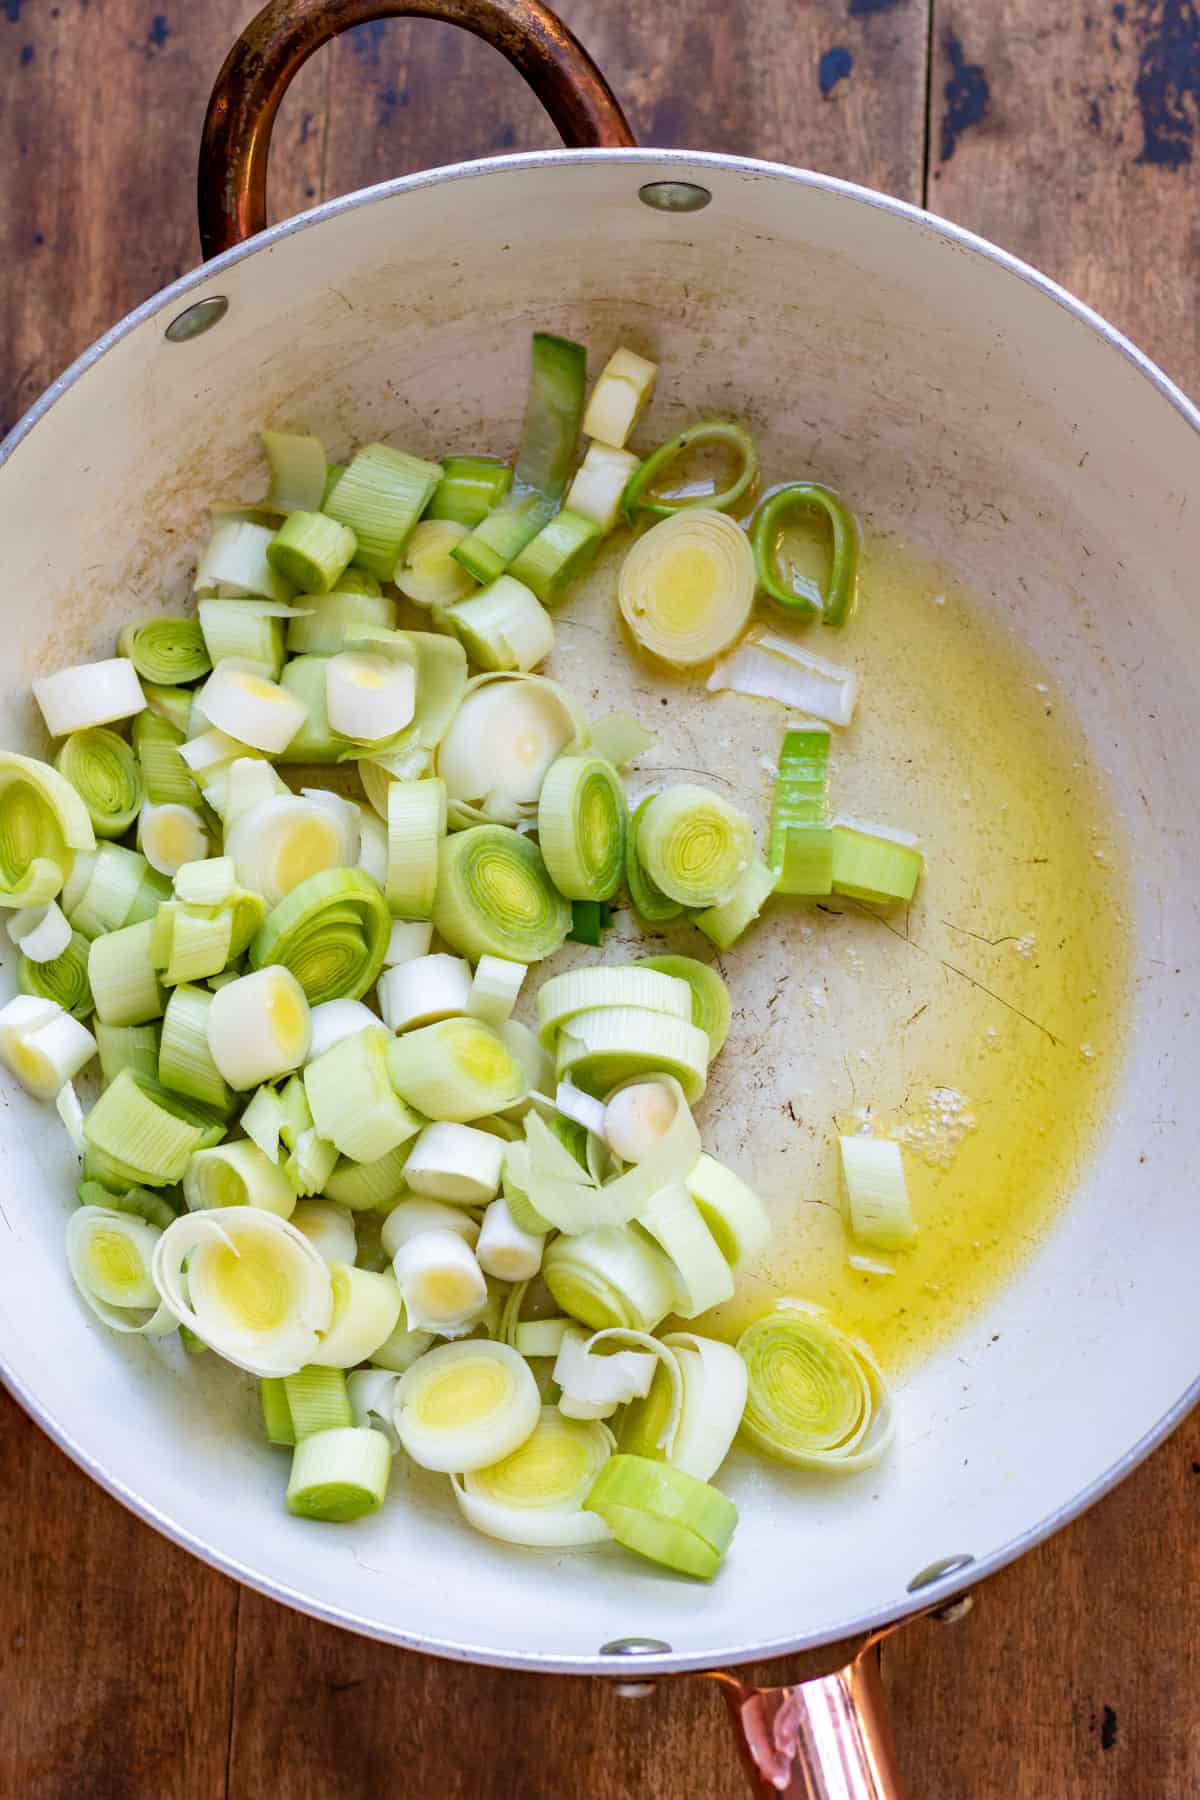 Chopped leeks in a skillet with melted butter.